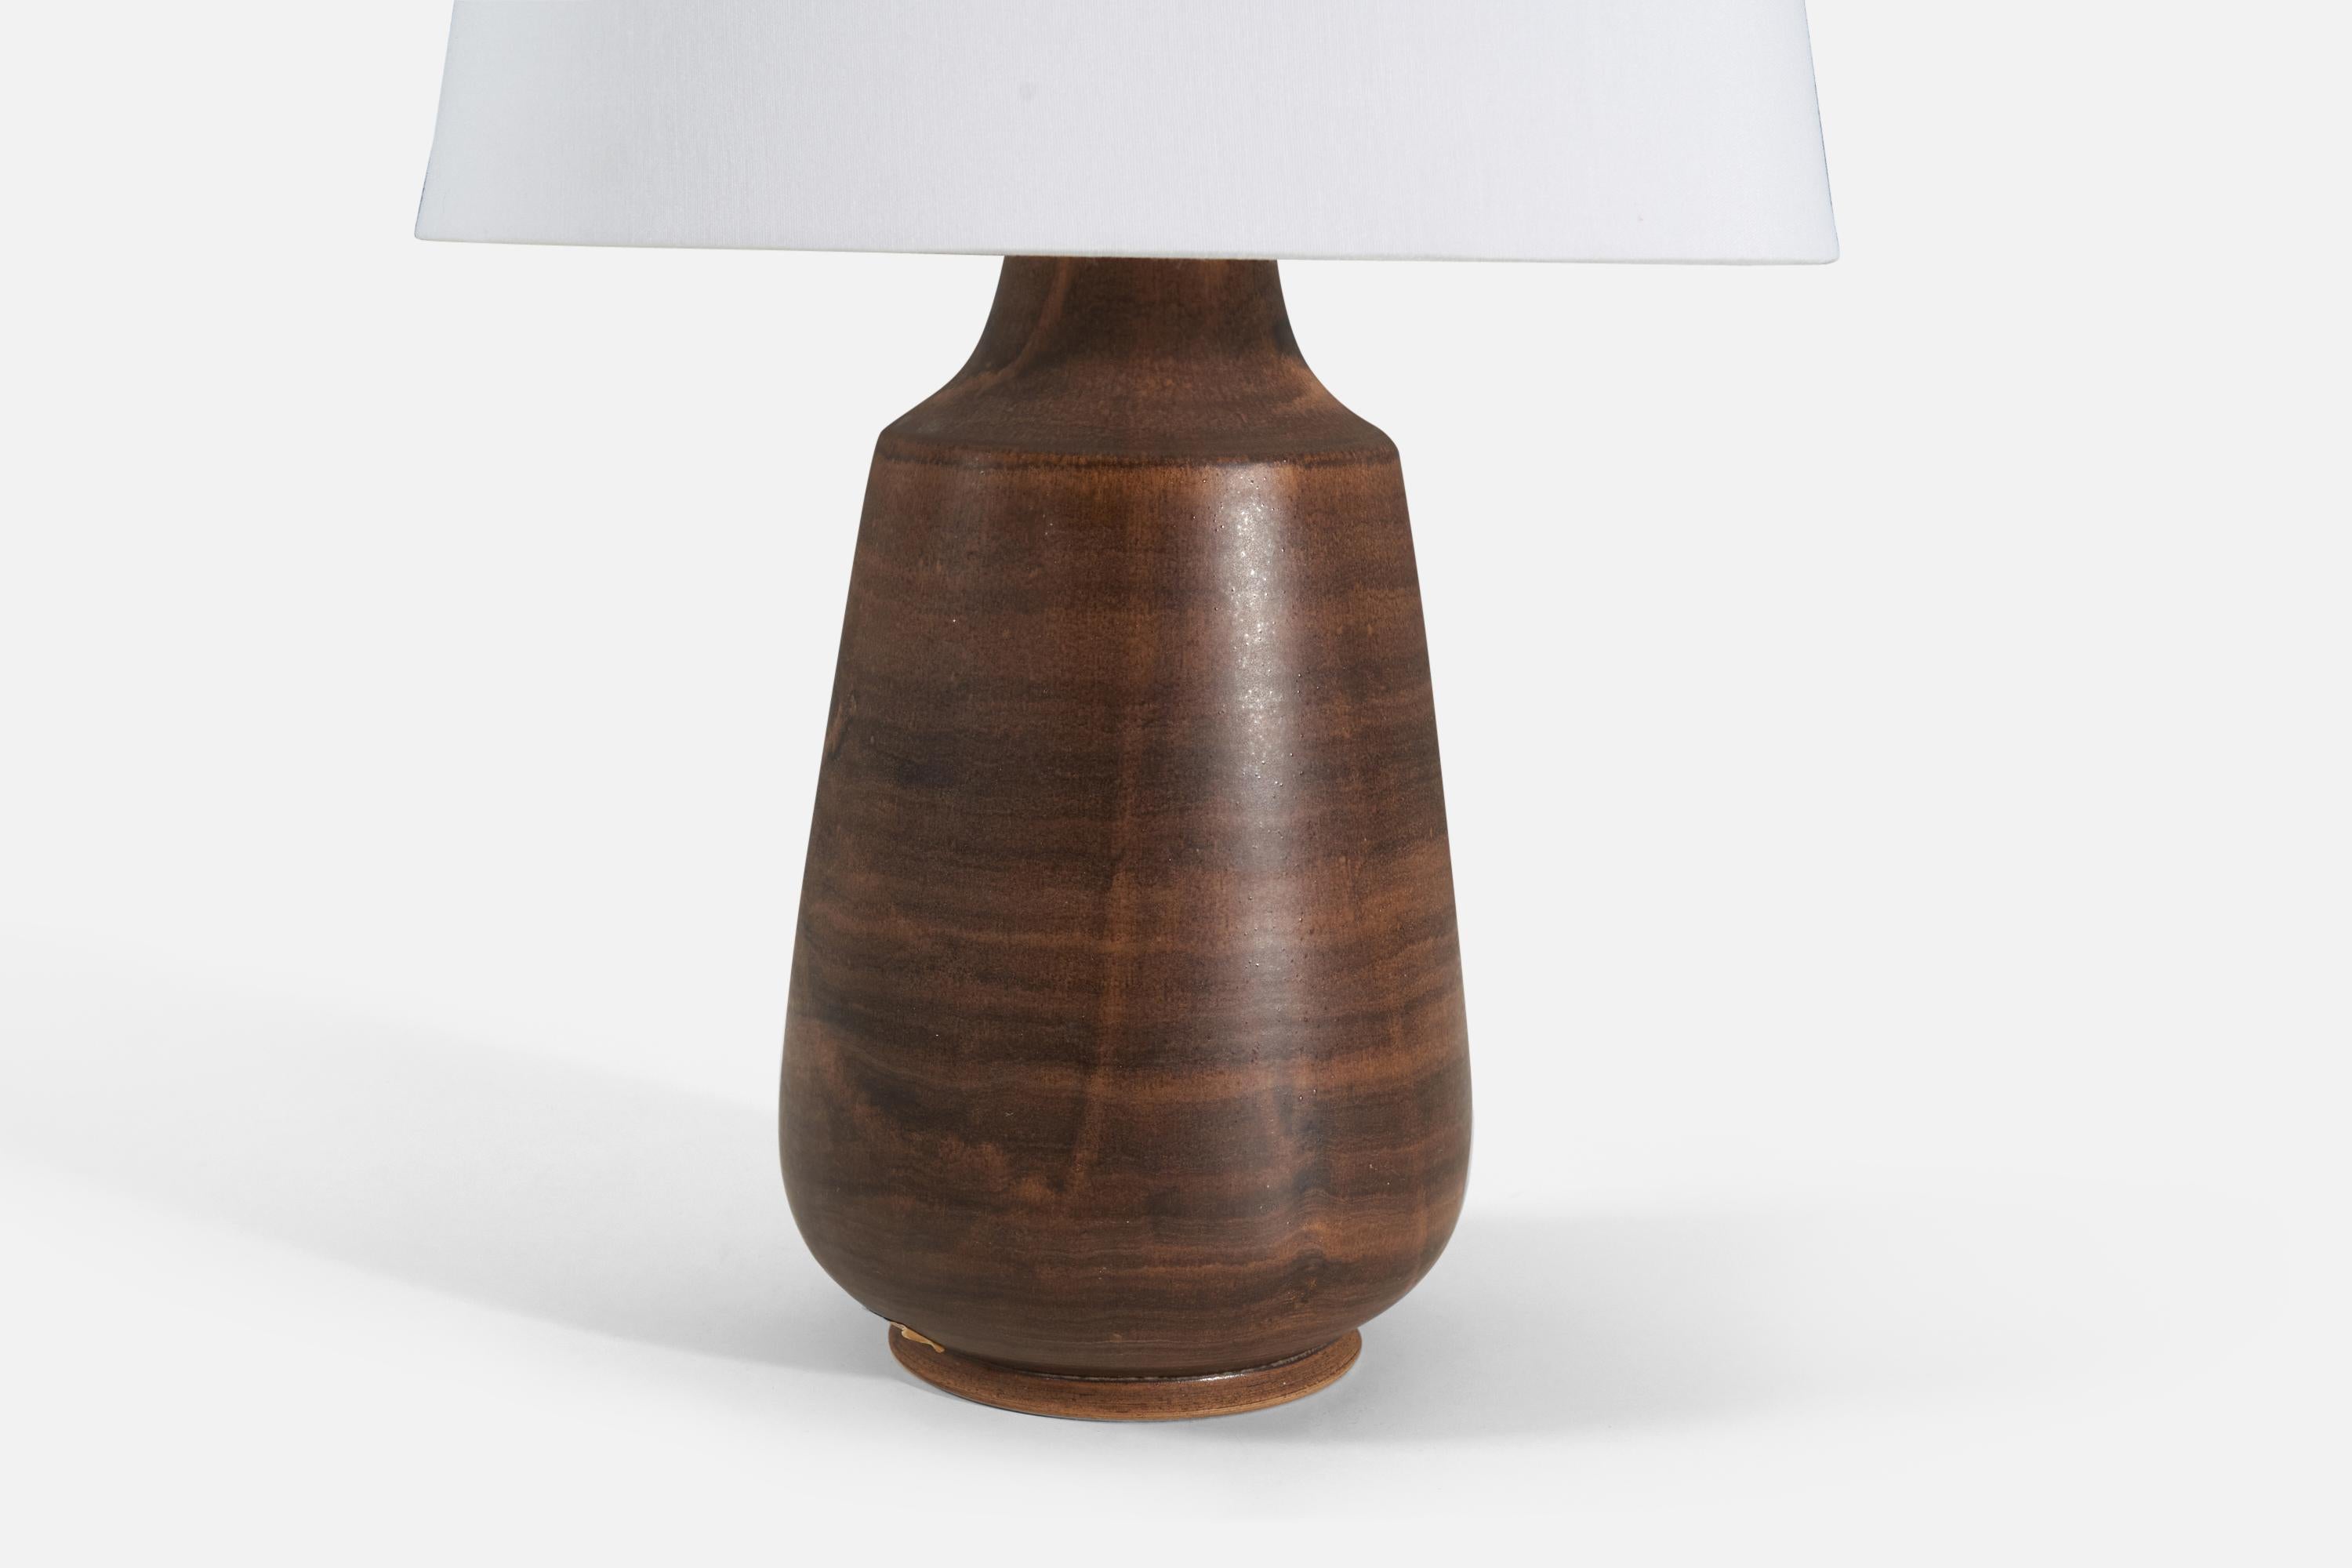  Löneberga Keramik, Table Lamp, Brown-Glazed Stoneware, Sweden, 1960s In Good Condition For Sale In High Point, NC